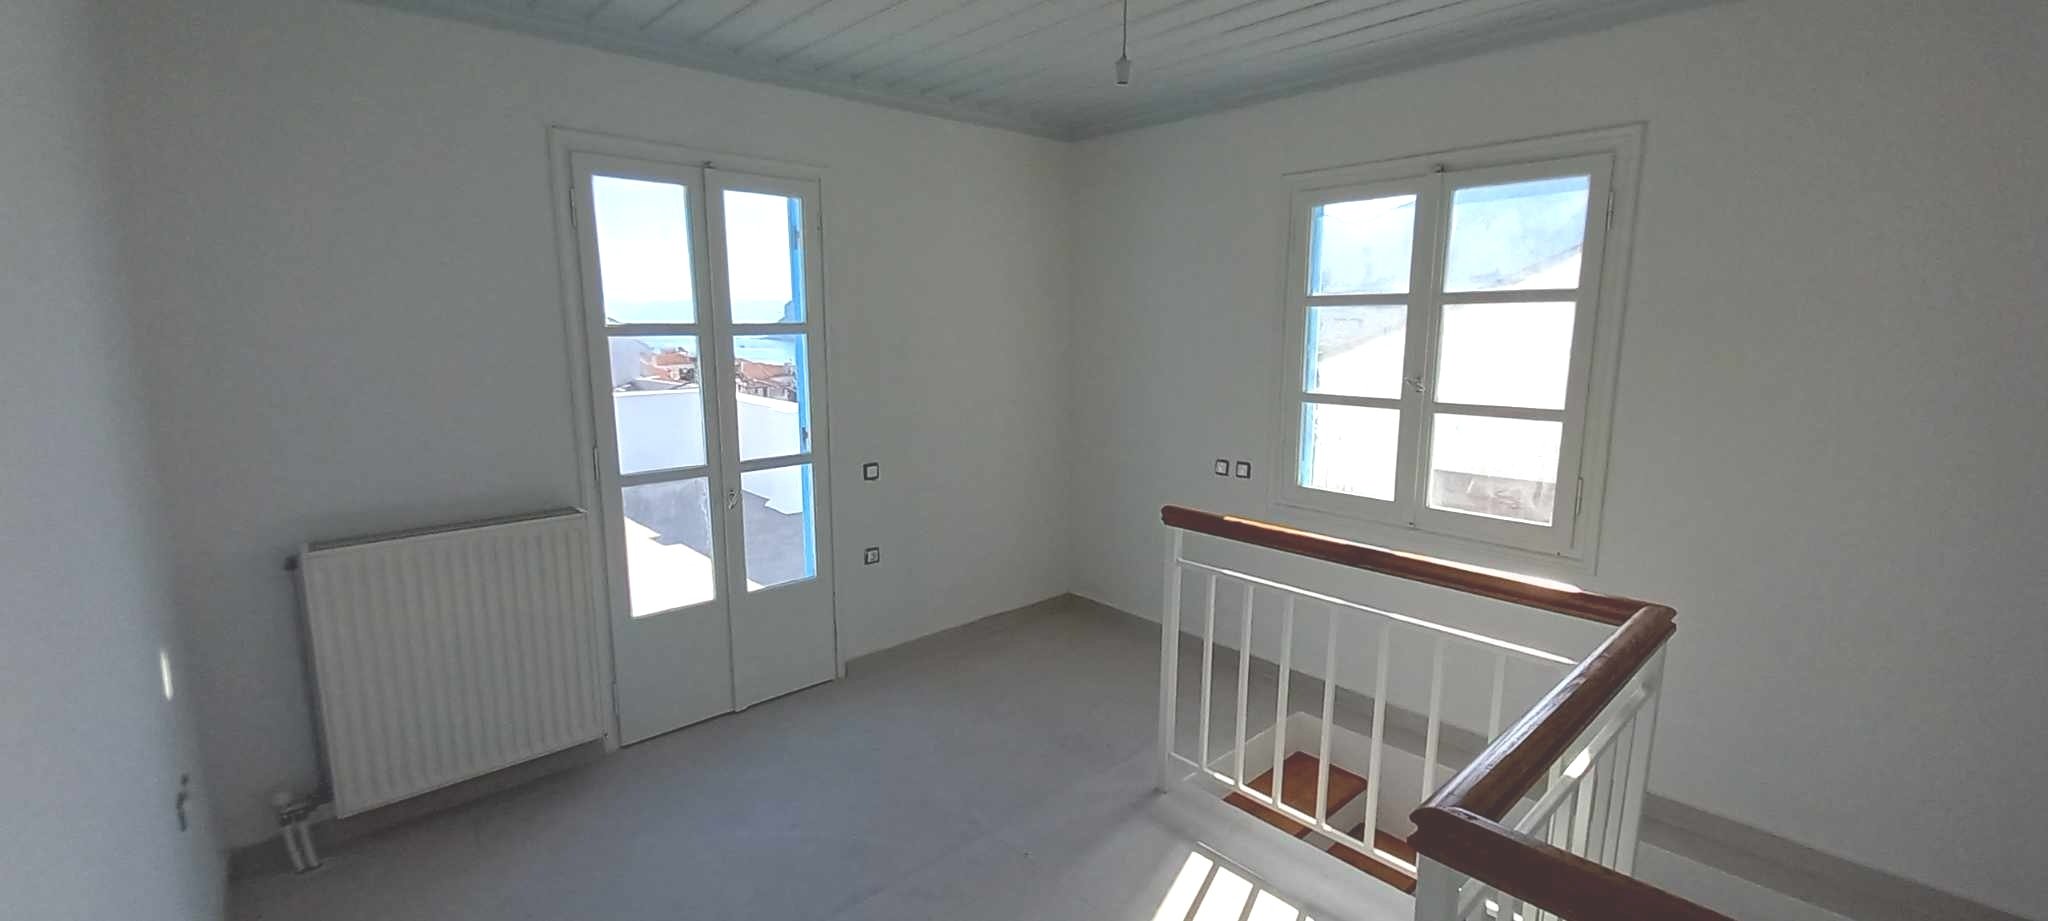 renovated_three_bedroom_mansion_with_amazing_terrace_and_view_new_windows.jpg